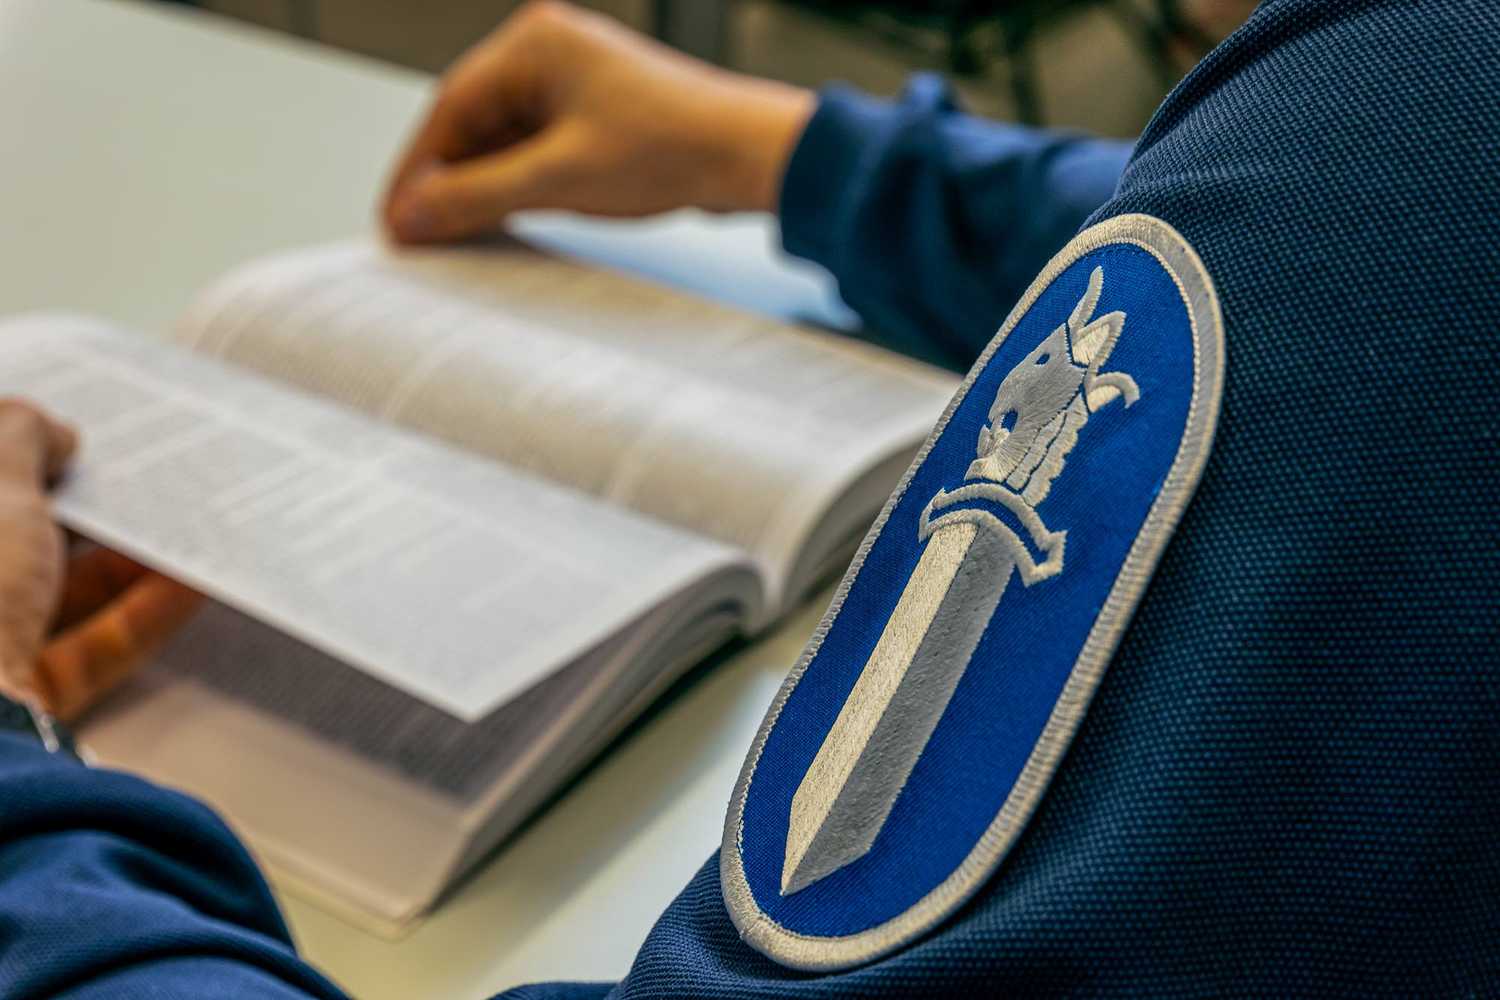 The police is reading the law book. Police sword emblem on the sleeve in the foreground.